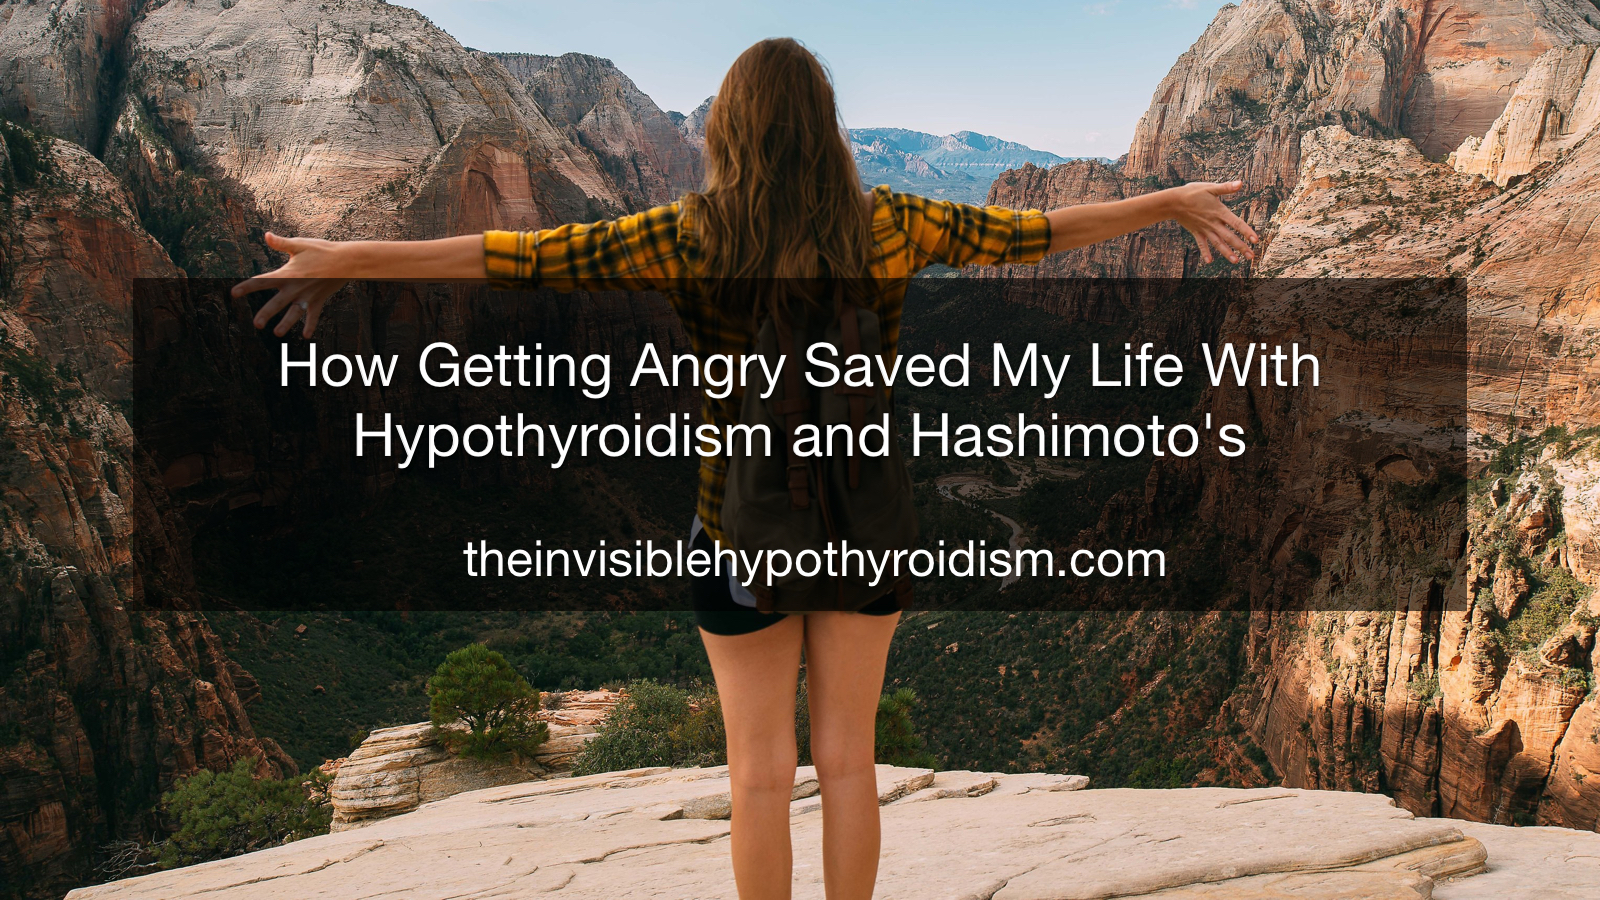 How Getting Angry Saved My Life With Hypothyroidism and Hashimoto's